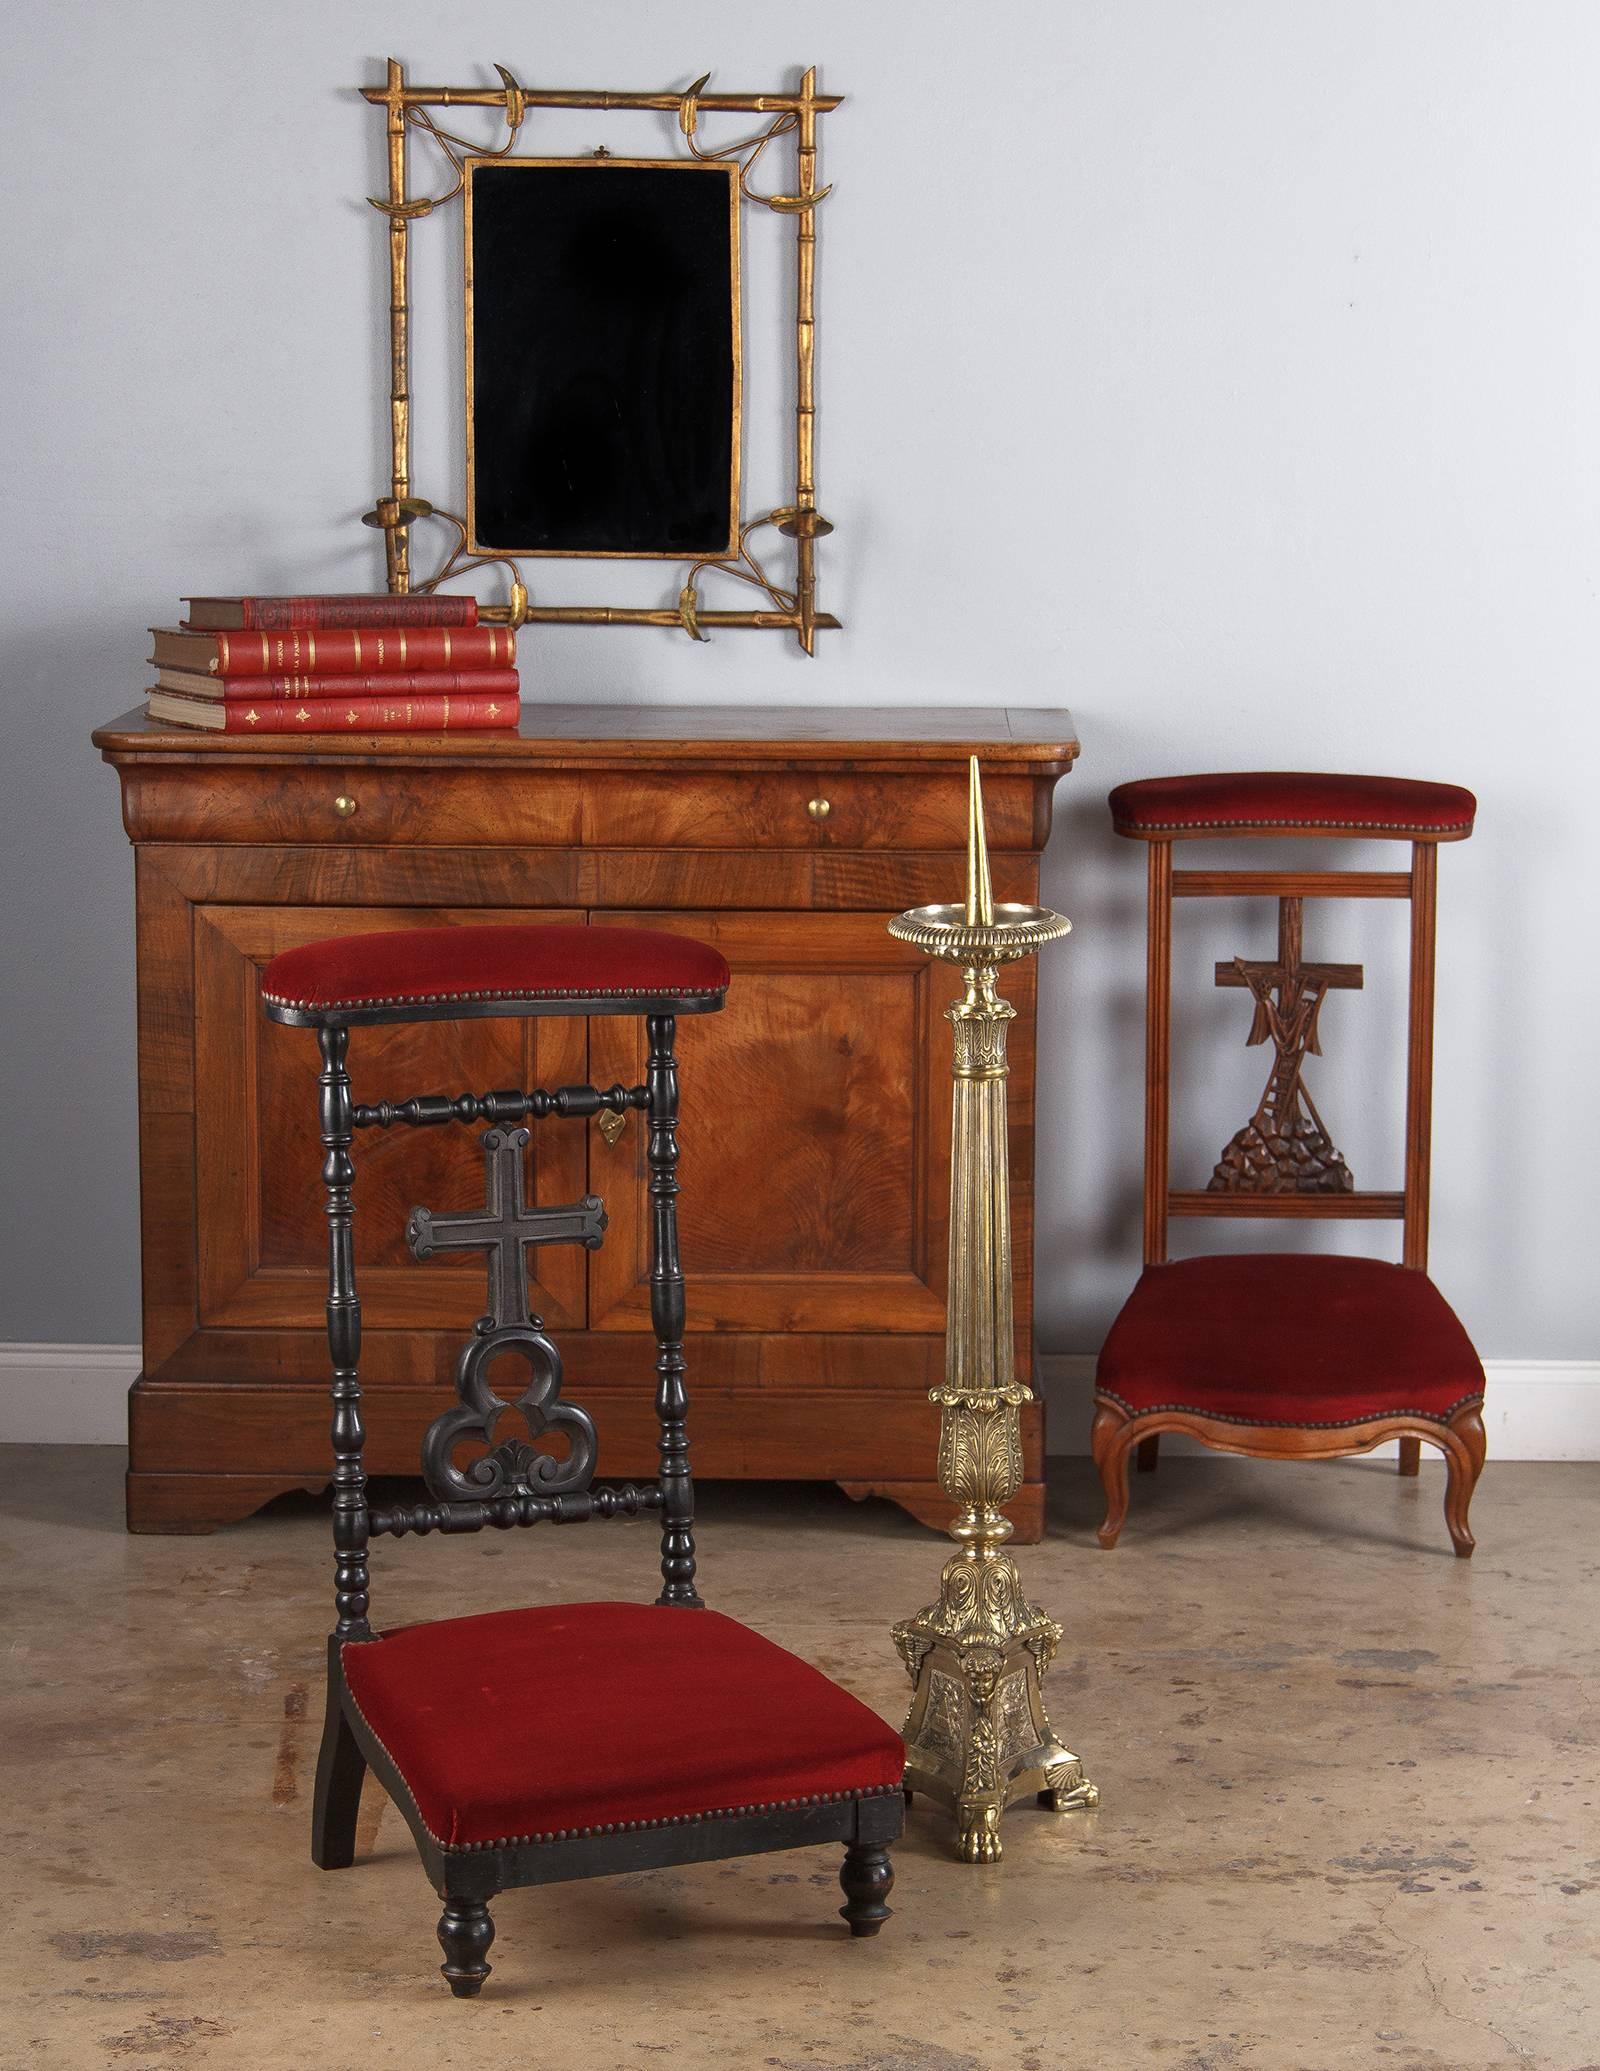 A prie dieu chair, prayer kneeler, in ebonized pearwood with red velvet upholstery from the period of Napoleon III, circa 1870. The frame features elaborate baluster turning with a detailed centerpiece of a relief carved cross above a flourished